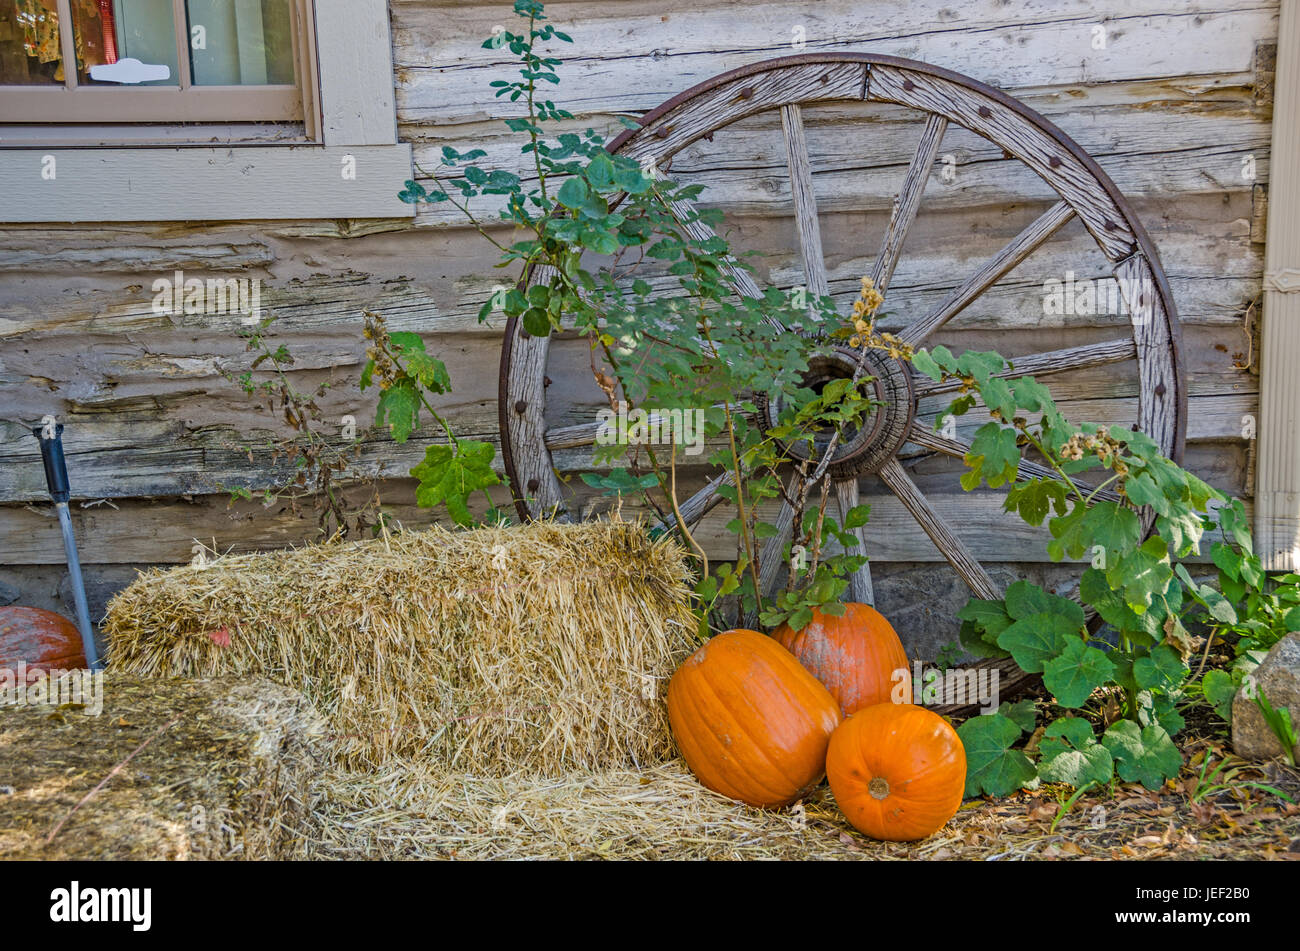 Antique wagon wheel leaning against a building with hay bales and pumpkins to create an autumn feel. Stock Photo